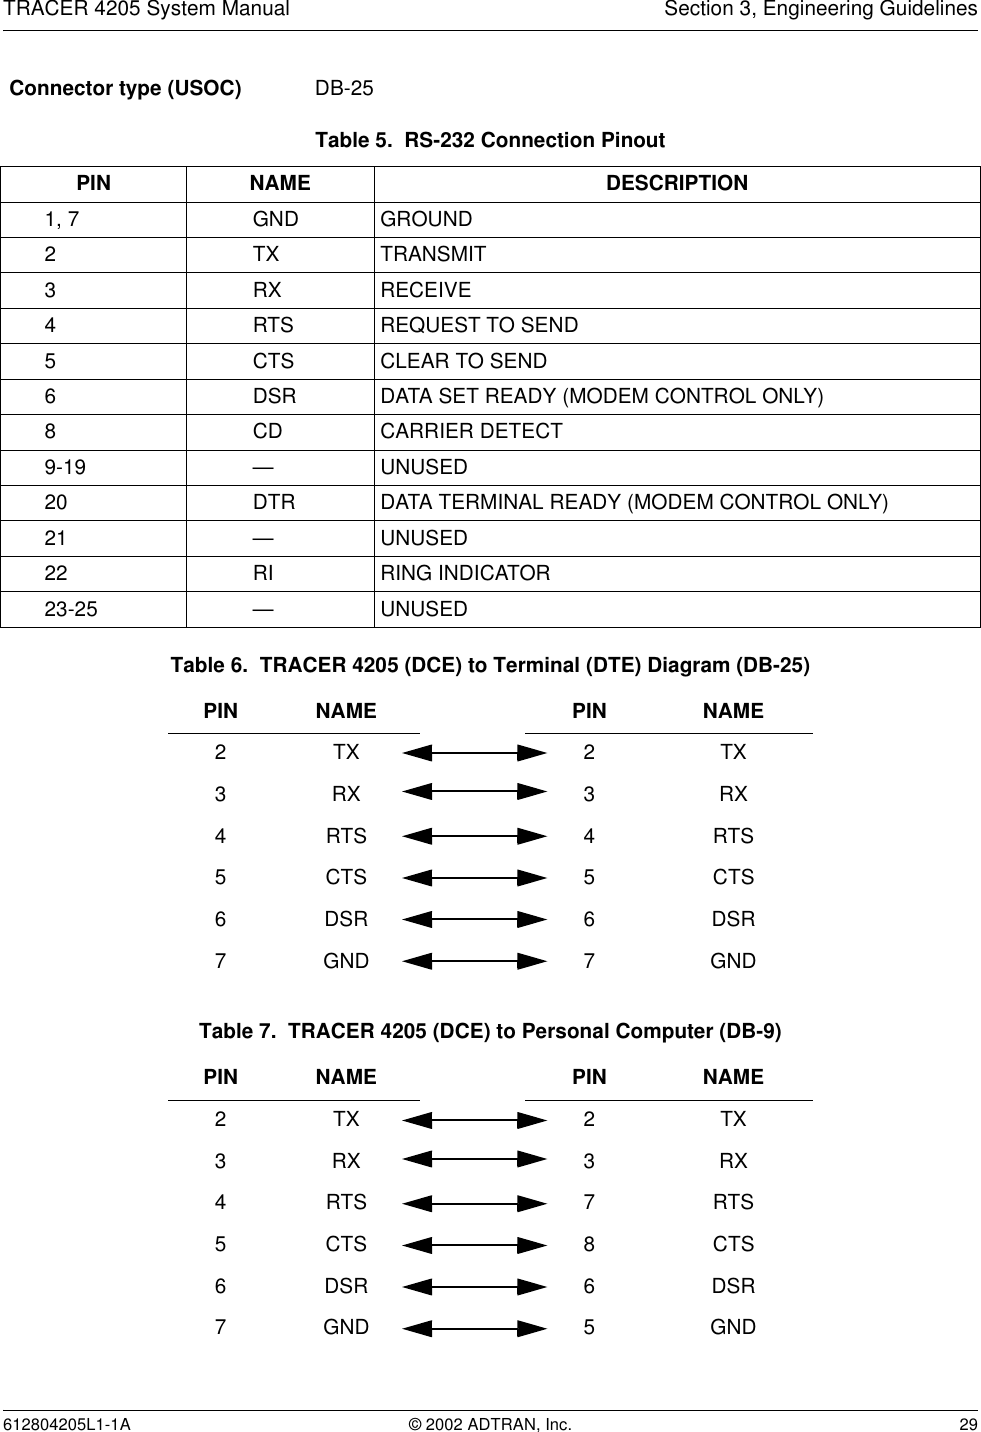 TRACER 4205 System Manual Section 3, Engineering Guidelines612804205L1-1A © 2002 ADTRAN, Inc. 29 Connector type (USOC)  DB-25Table 5.  RS-232 Connection Pinout  PIN NAME DESCRIPTION1, 7 GND GROUND2 TX TRANSMIT3 RX RECEIVE4 RTS REQUEST TO SEND5 CTS CLEAR TO SEND6 DSR DATA SET READY (MODEM CONTROL ONLY)8 CD CARRIER DETECT9-19 — UNUSED20 DTR DATA TERMINAL READY (MODEM CONTROL ONLY)21 — UNUSED22 RI RING INDICATOR23-25 — UNUSEDTable 6.  TRACER 4205 (DCE) to Terminal (DTE) Diagram (DB-25)PIN NAME PIN NAME2TX 2 TX3RX 3 RX4 RTS 4 RTS5 CTS 5 CTS6 DSR 6 DSR7 GND 7 GNDTable 7.  TRACER 4205 (DCE) to Personal Computer (DB-9)PIN NAME PIN NAME2TX 2 TX3RX 3 RX4 RTS 7 RTS5 CTS 8 CTS6 DSR 6 DSR7 GND 5 GND